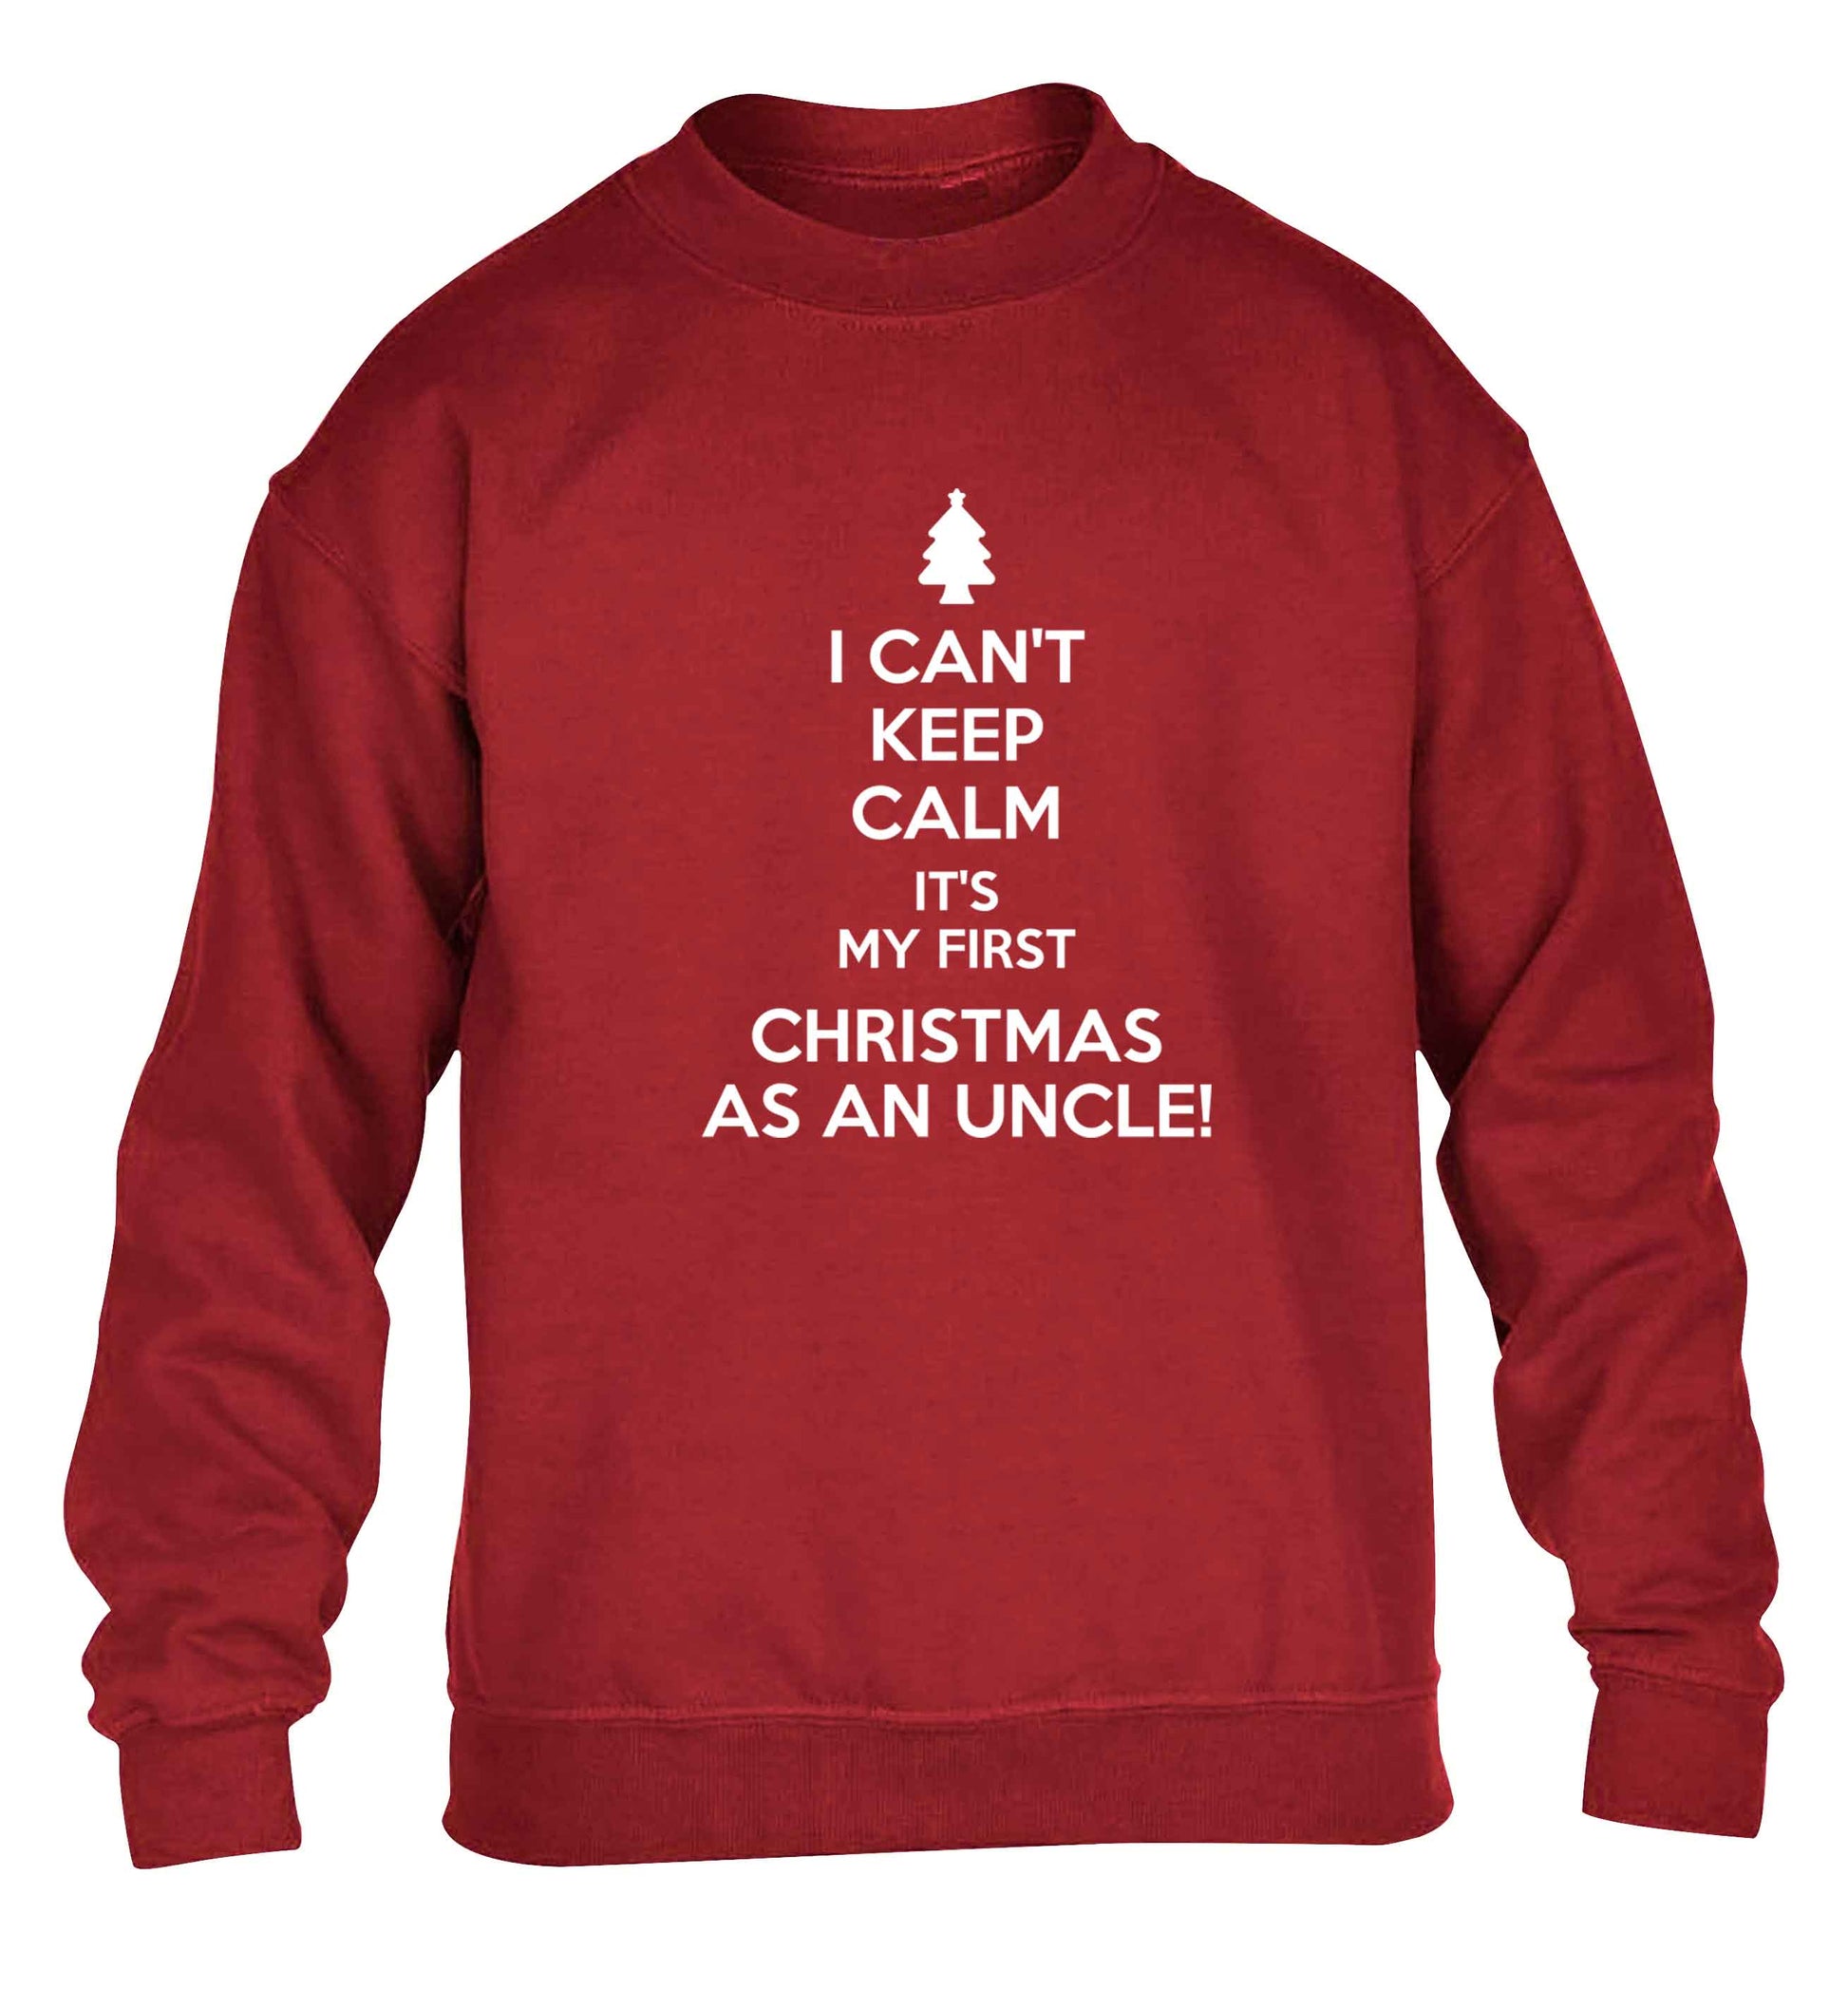 I can't keep calm it's my first Christmas as an uncle! children's grey sweater 12-13 Years